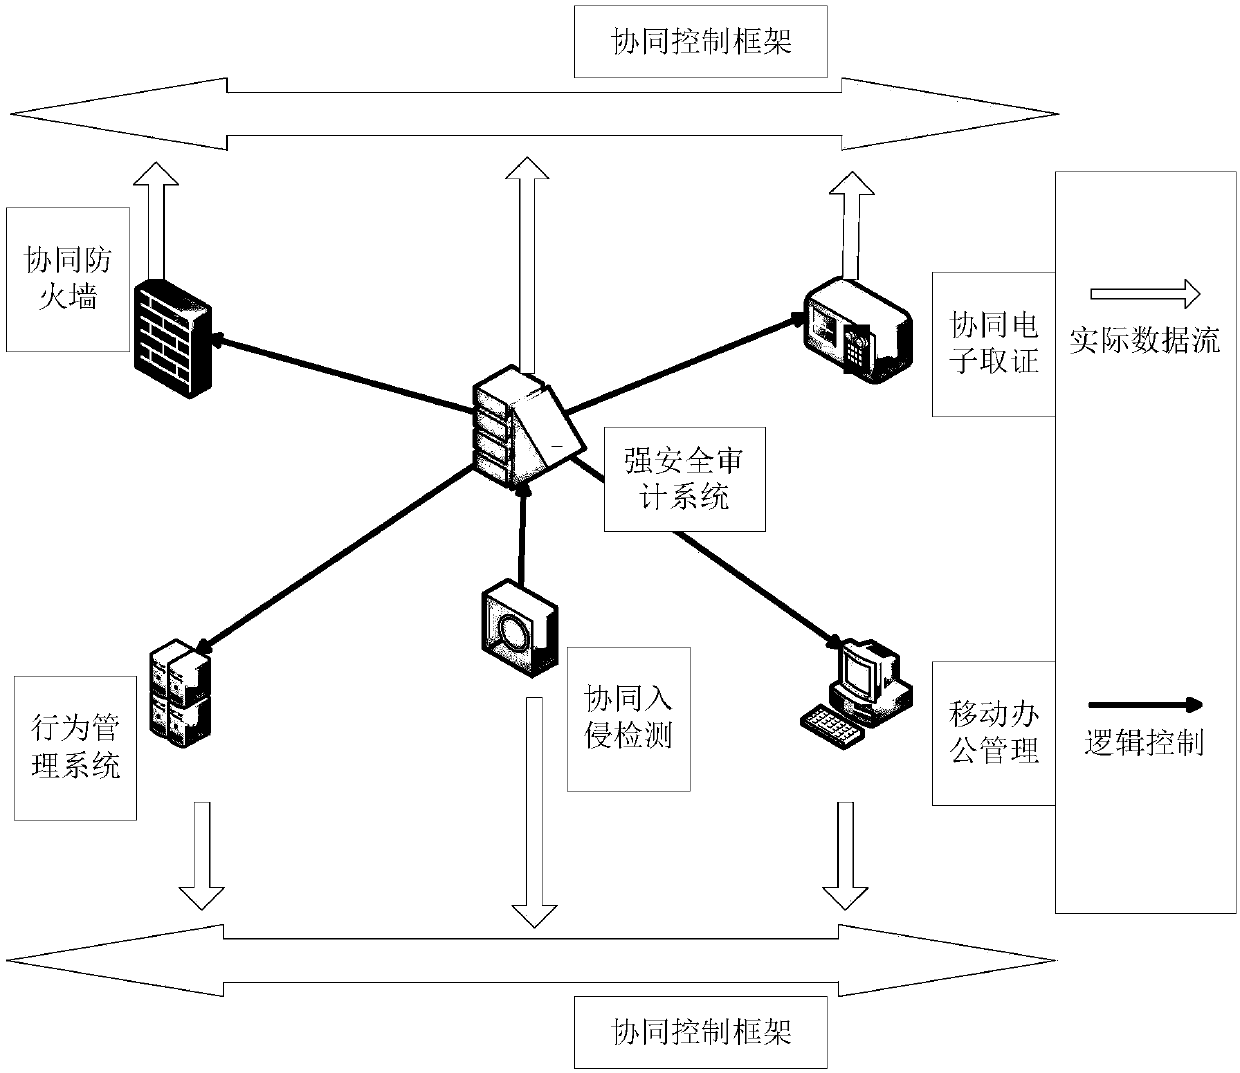 Collaborative defense method for network protection and system